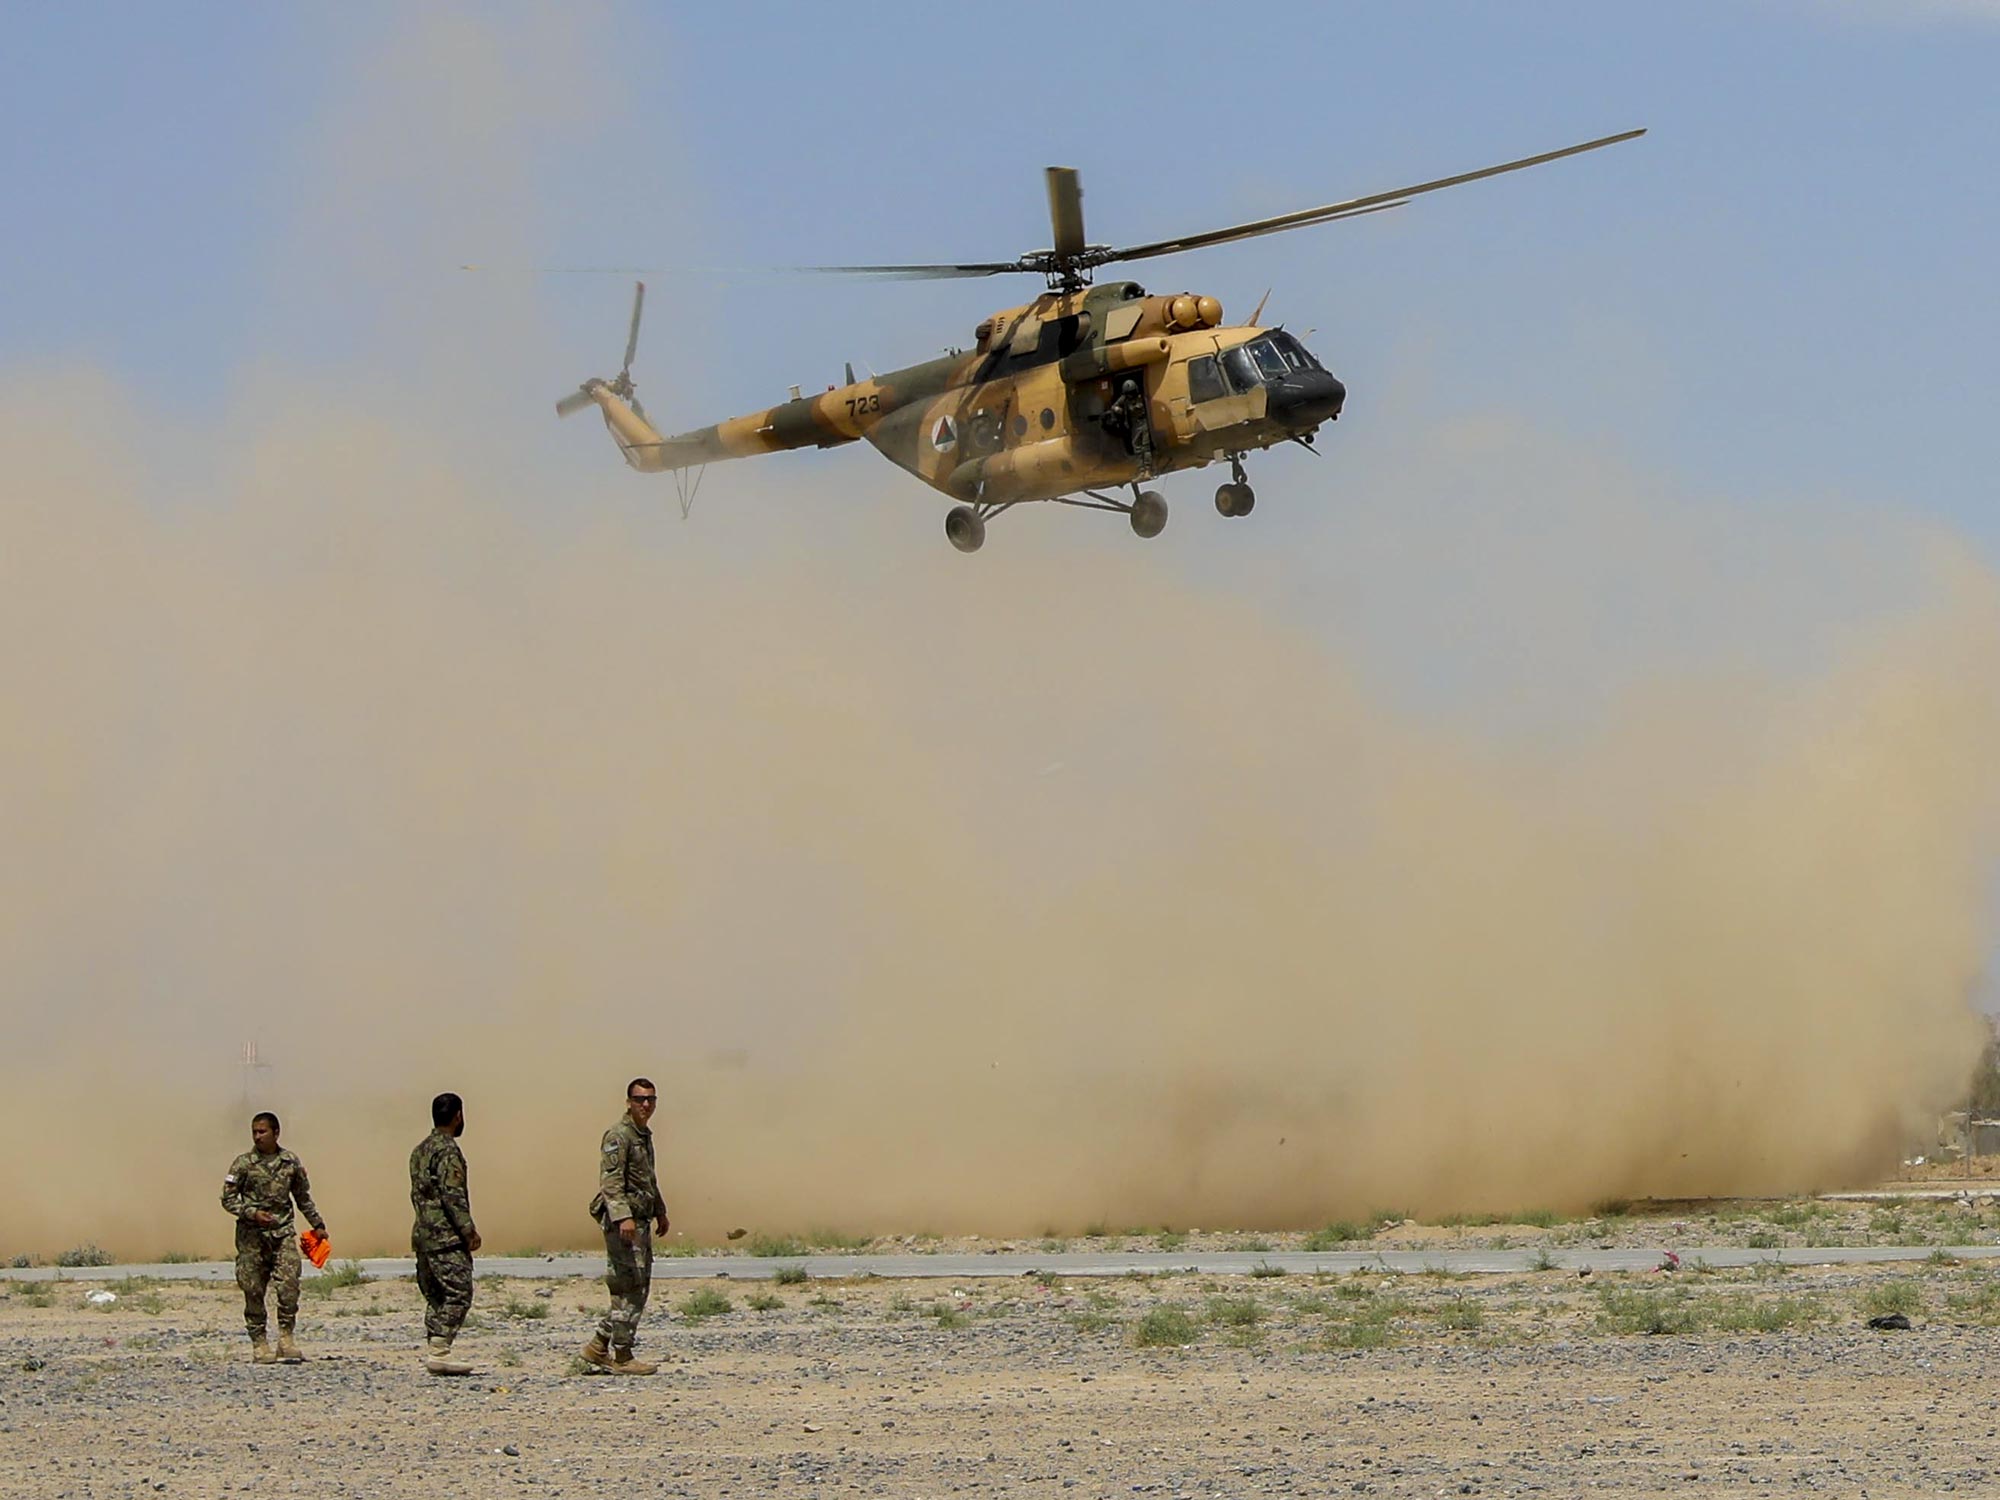 Afghan Air Force Mi-17 helicopter medical evacuation exercise